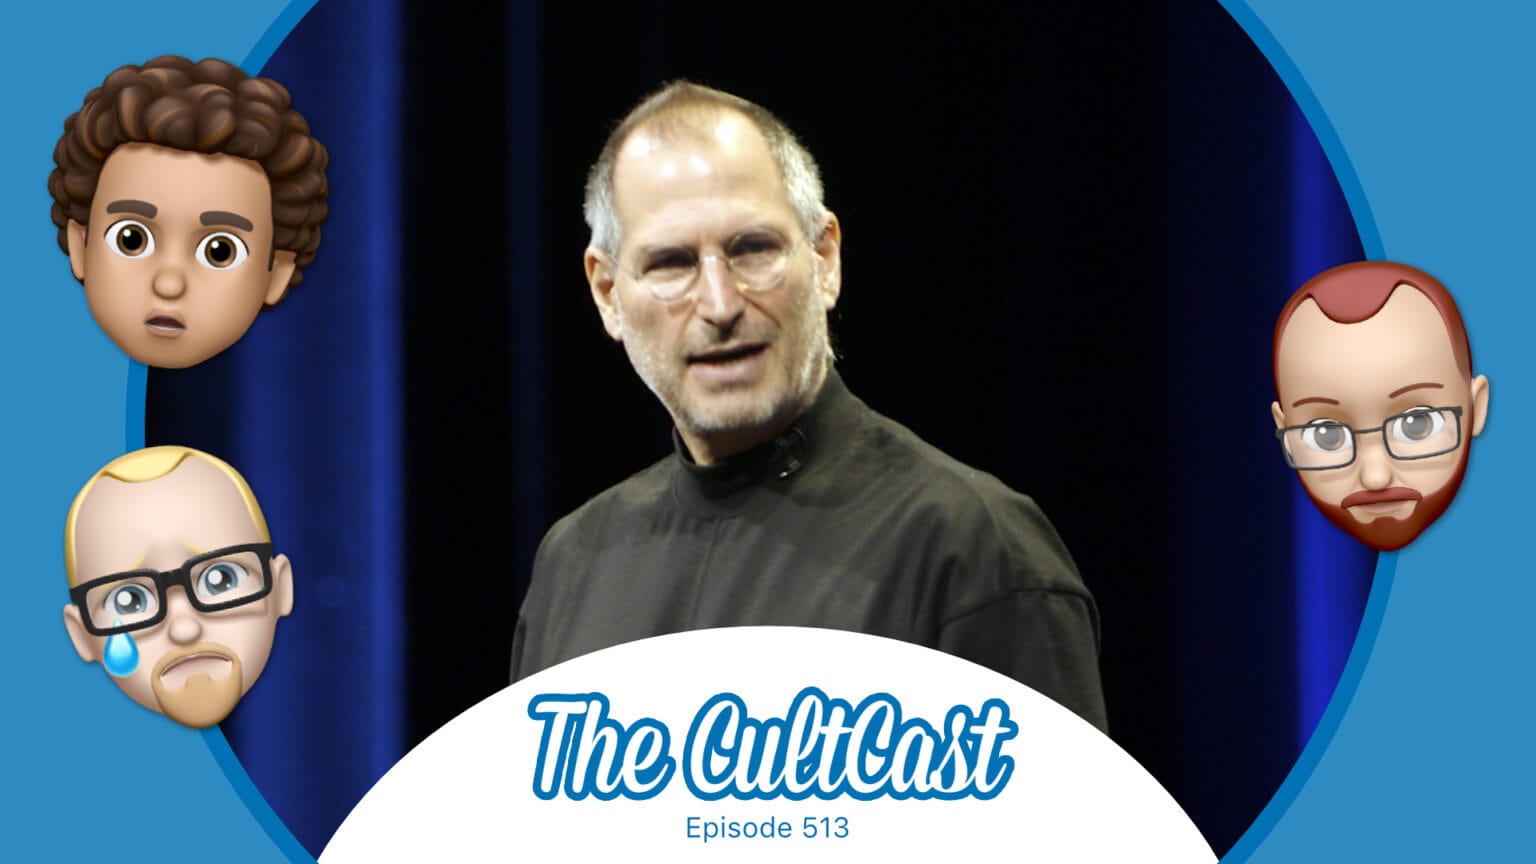 Remembering Steve Jobs on The CultCast